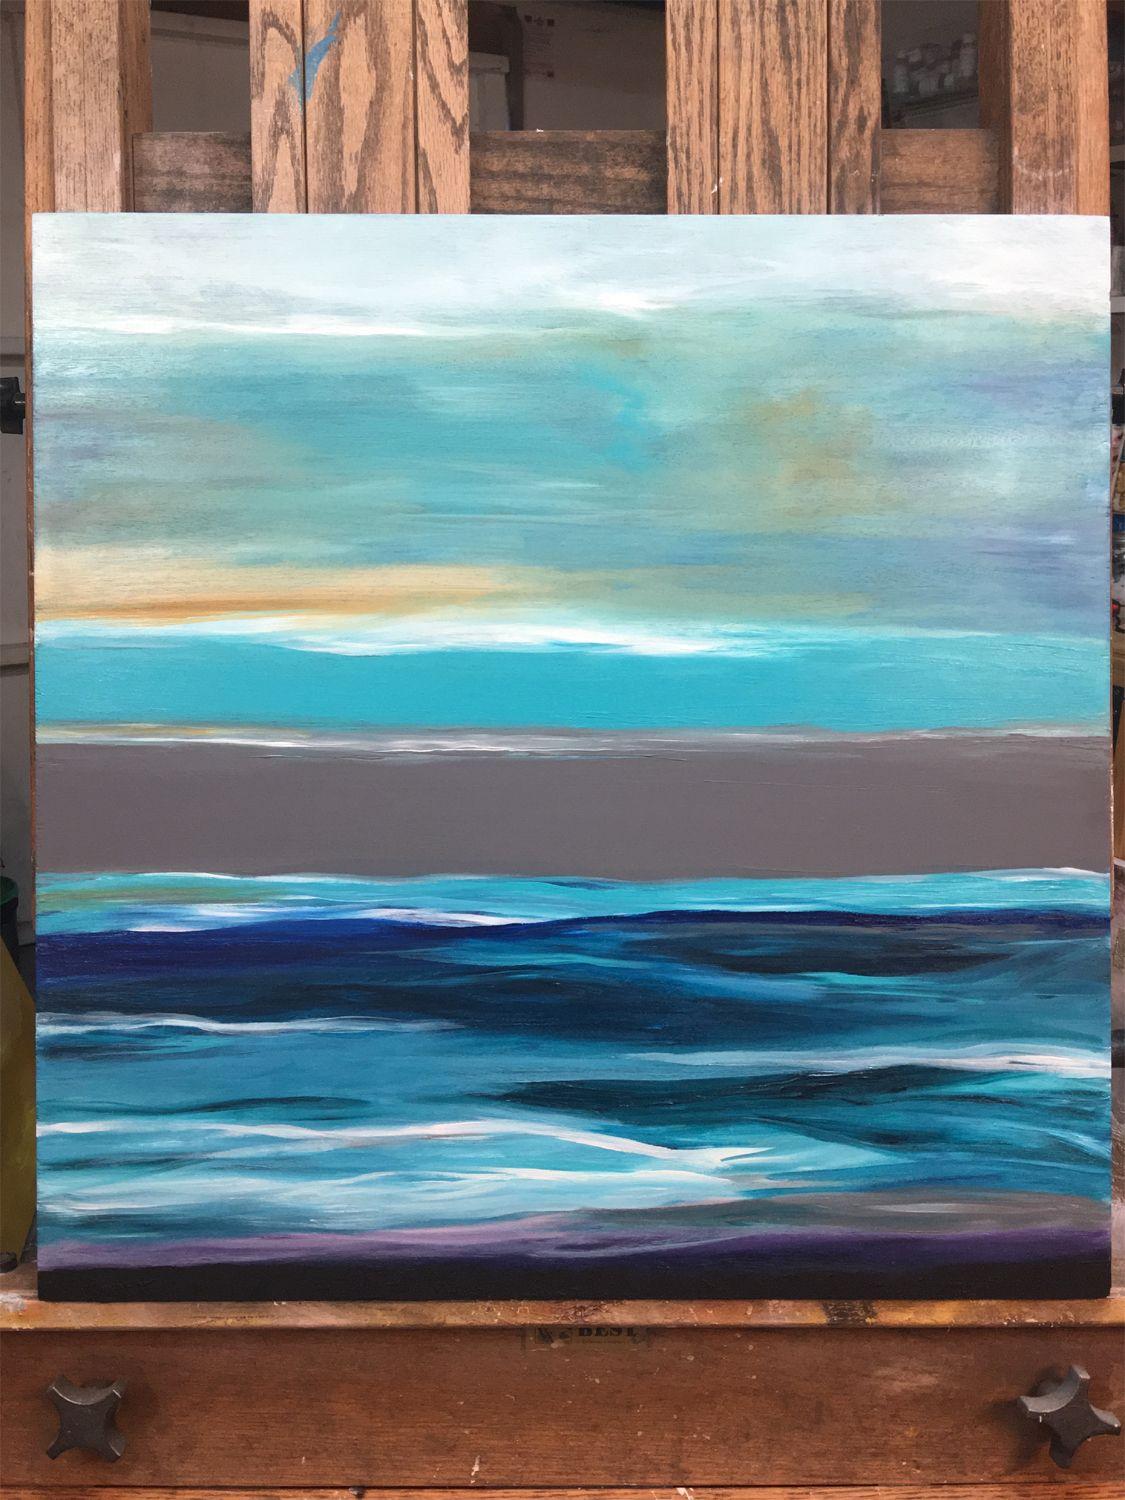 Poetic Art Statement: RELAX Today - Be At Peace. RELAX is a One-of-a-Kind Modern Surreal Seascape or Pure Abstract using only Eco-Friendly Oil Mediums with no added chemicals, healthy for our homes, offices, and earth. 1.75